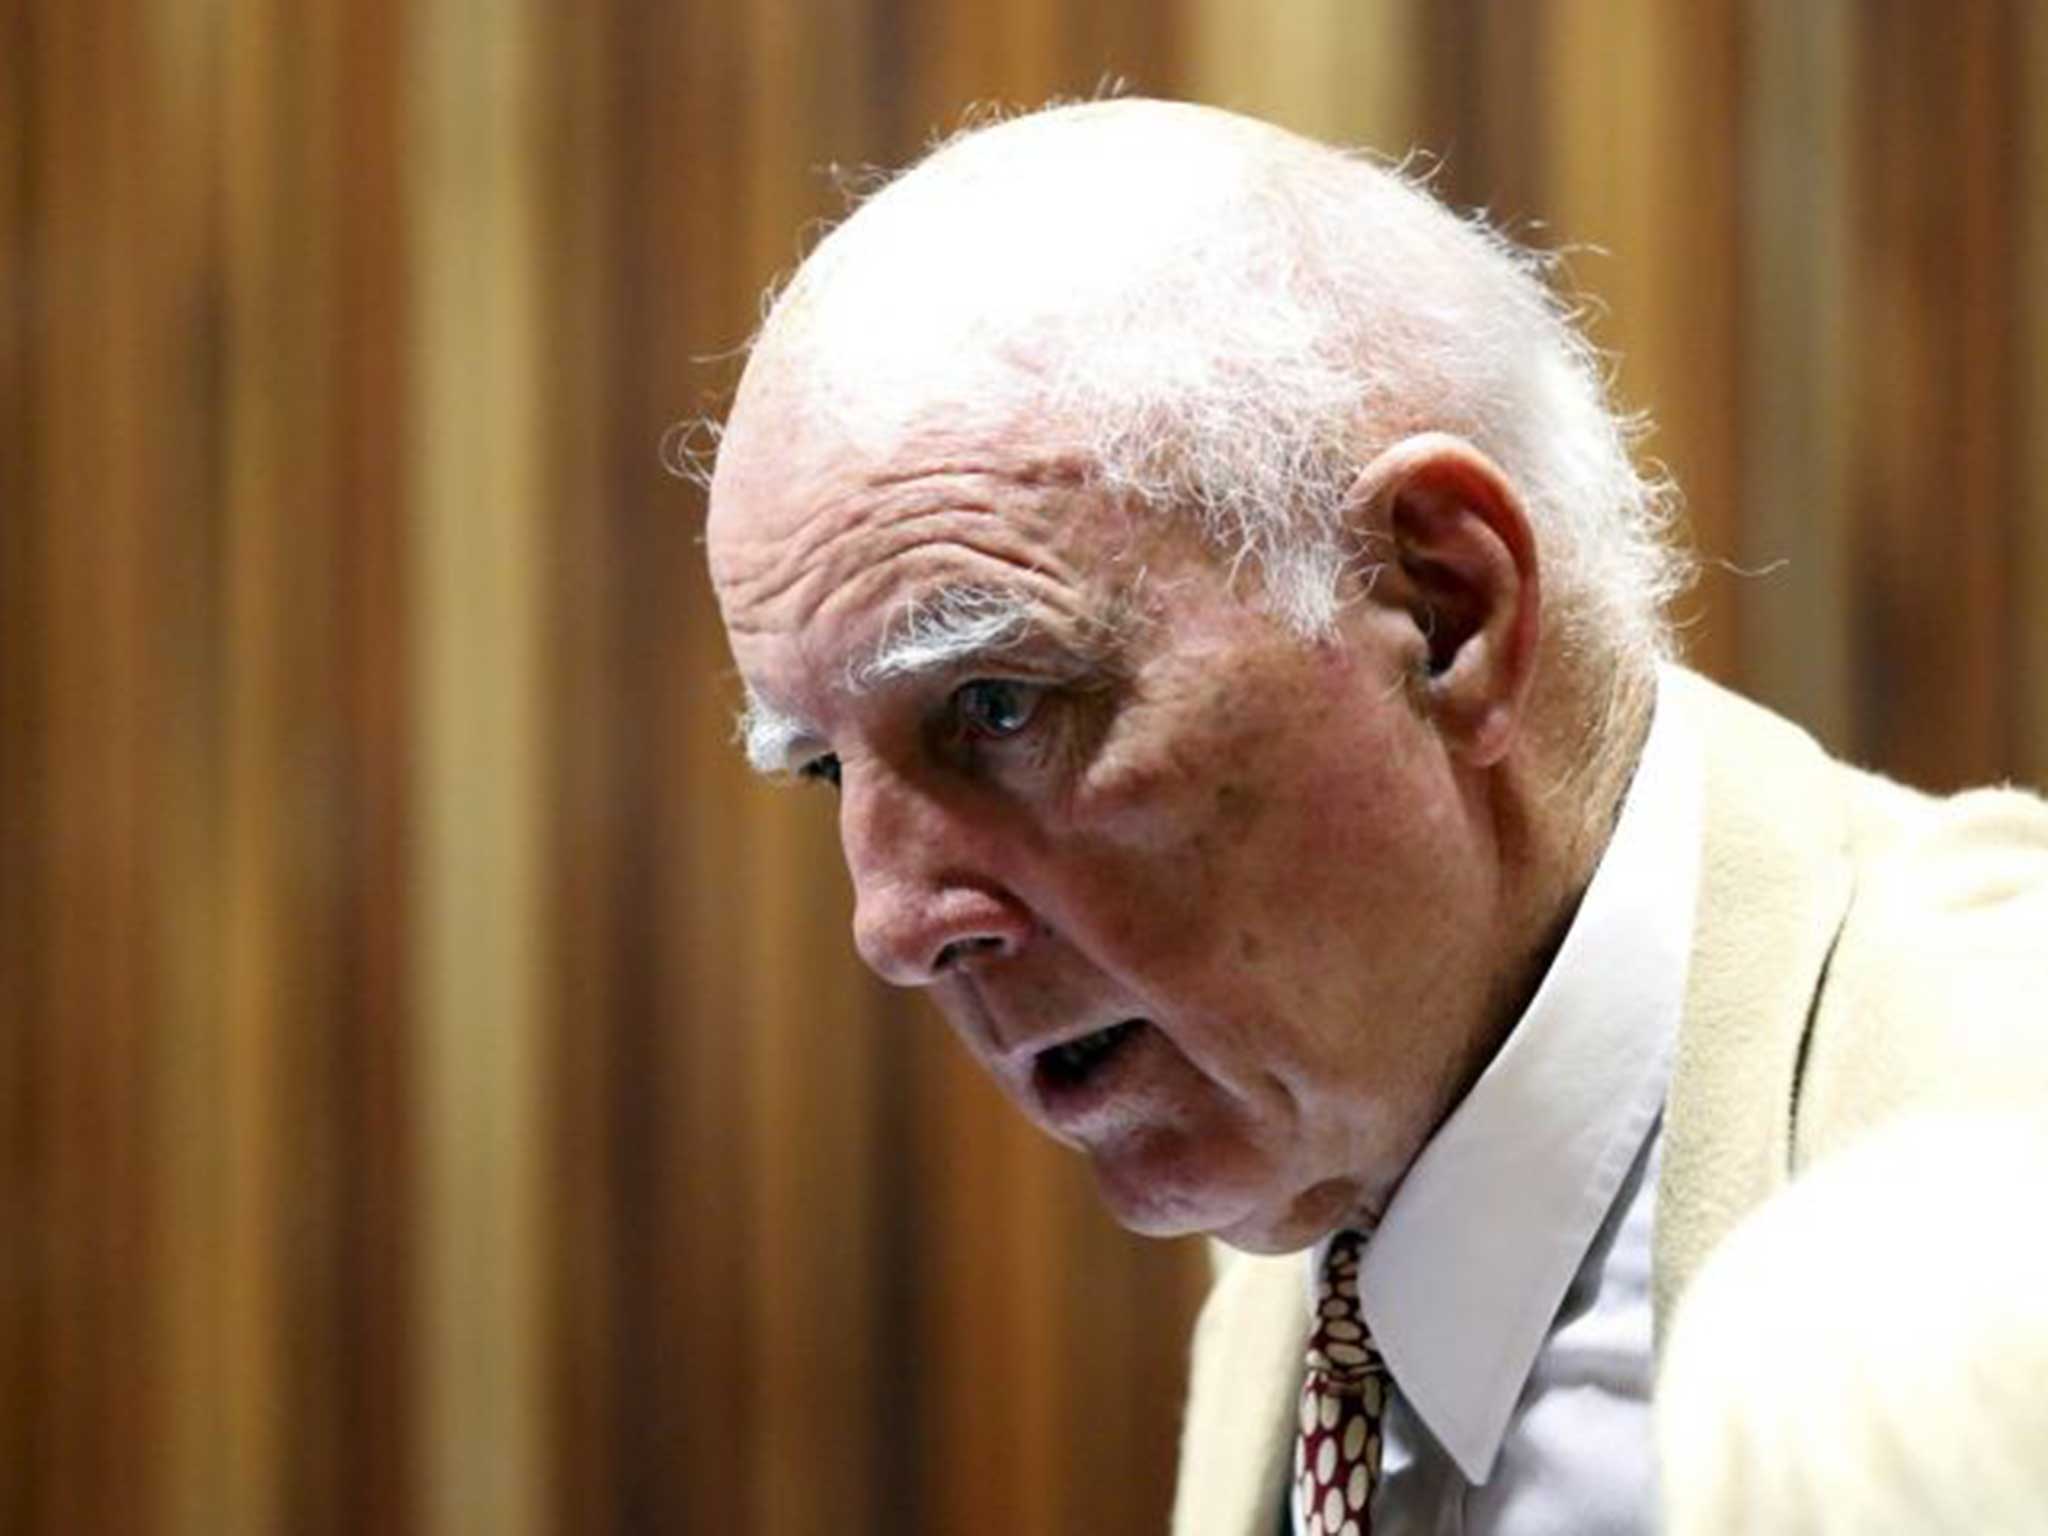 Bob Hewitt had denied all the charges